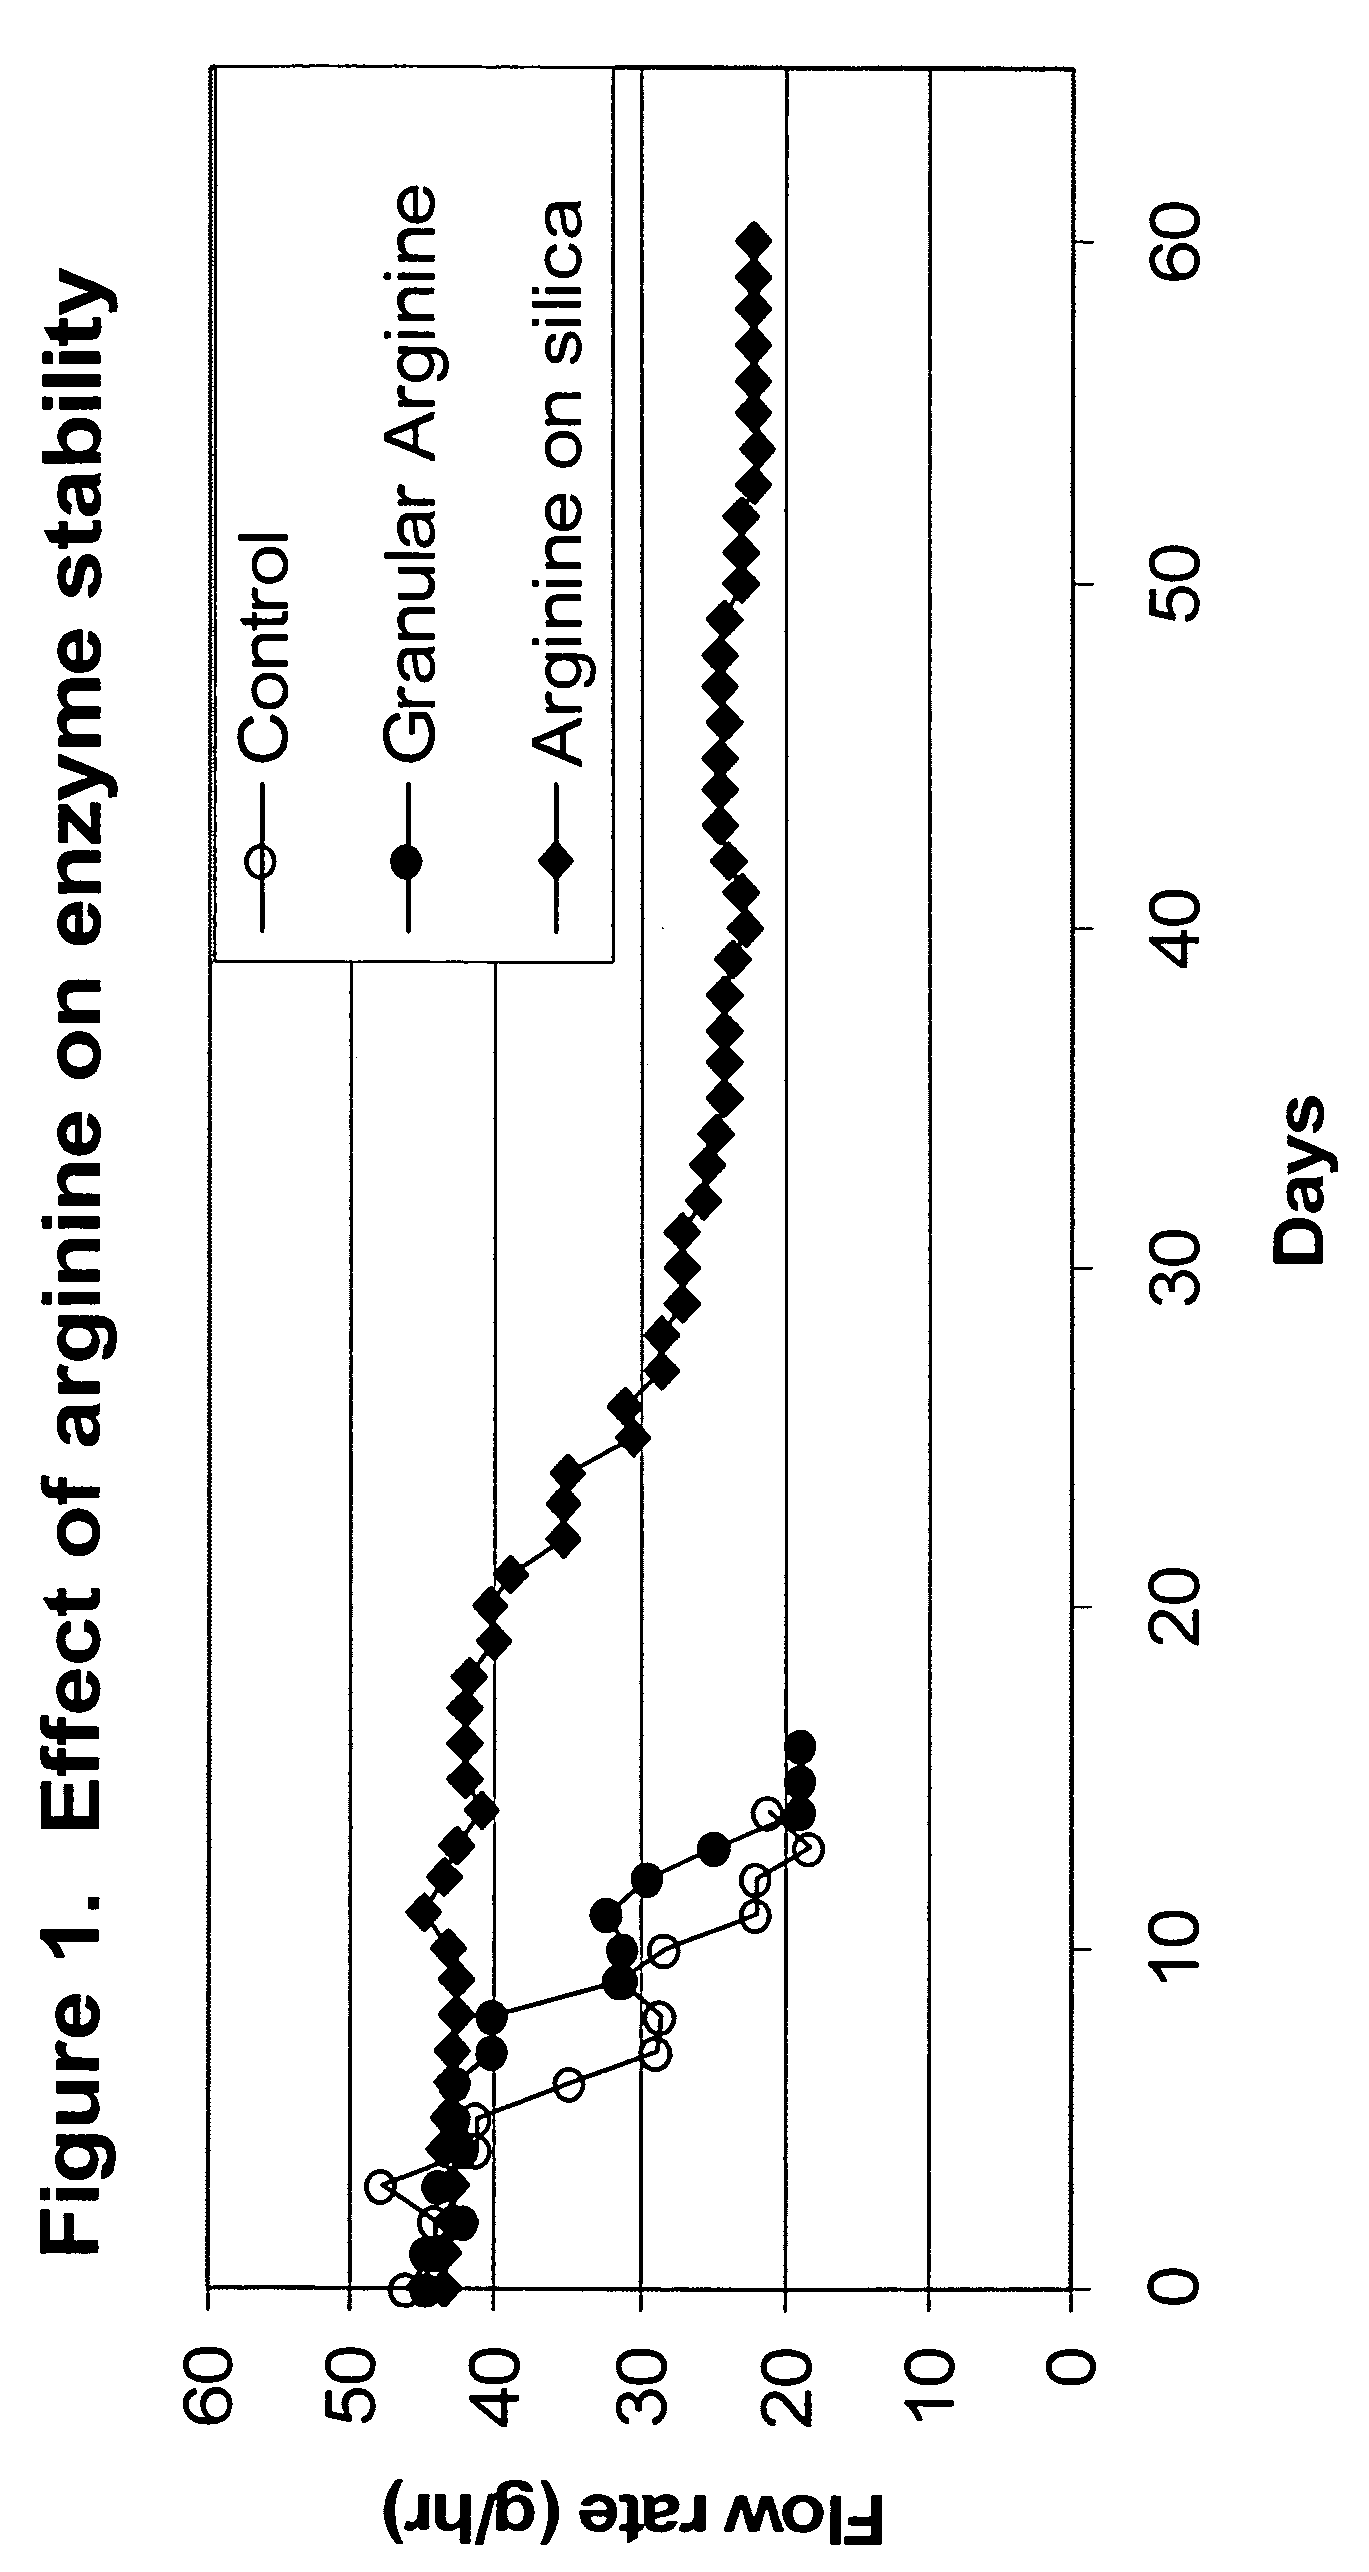 Method for producing fats or oils